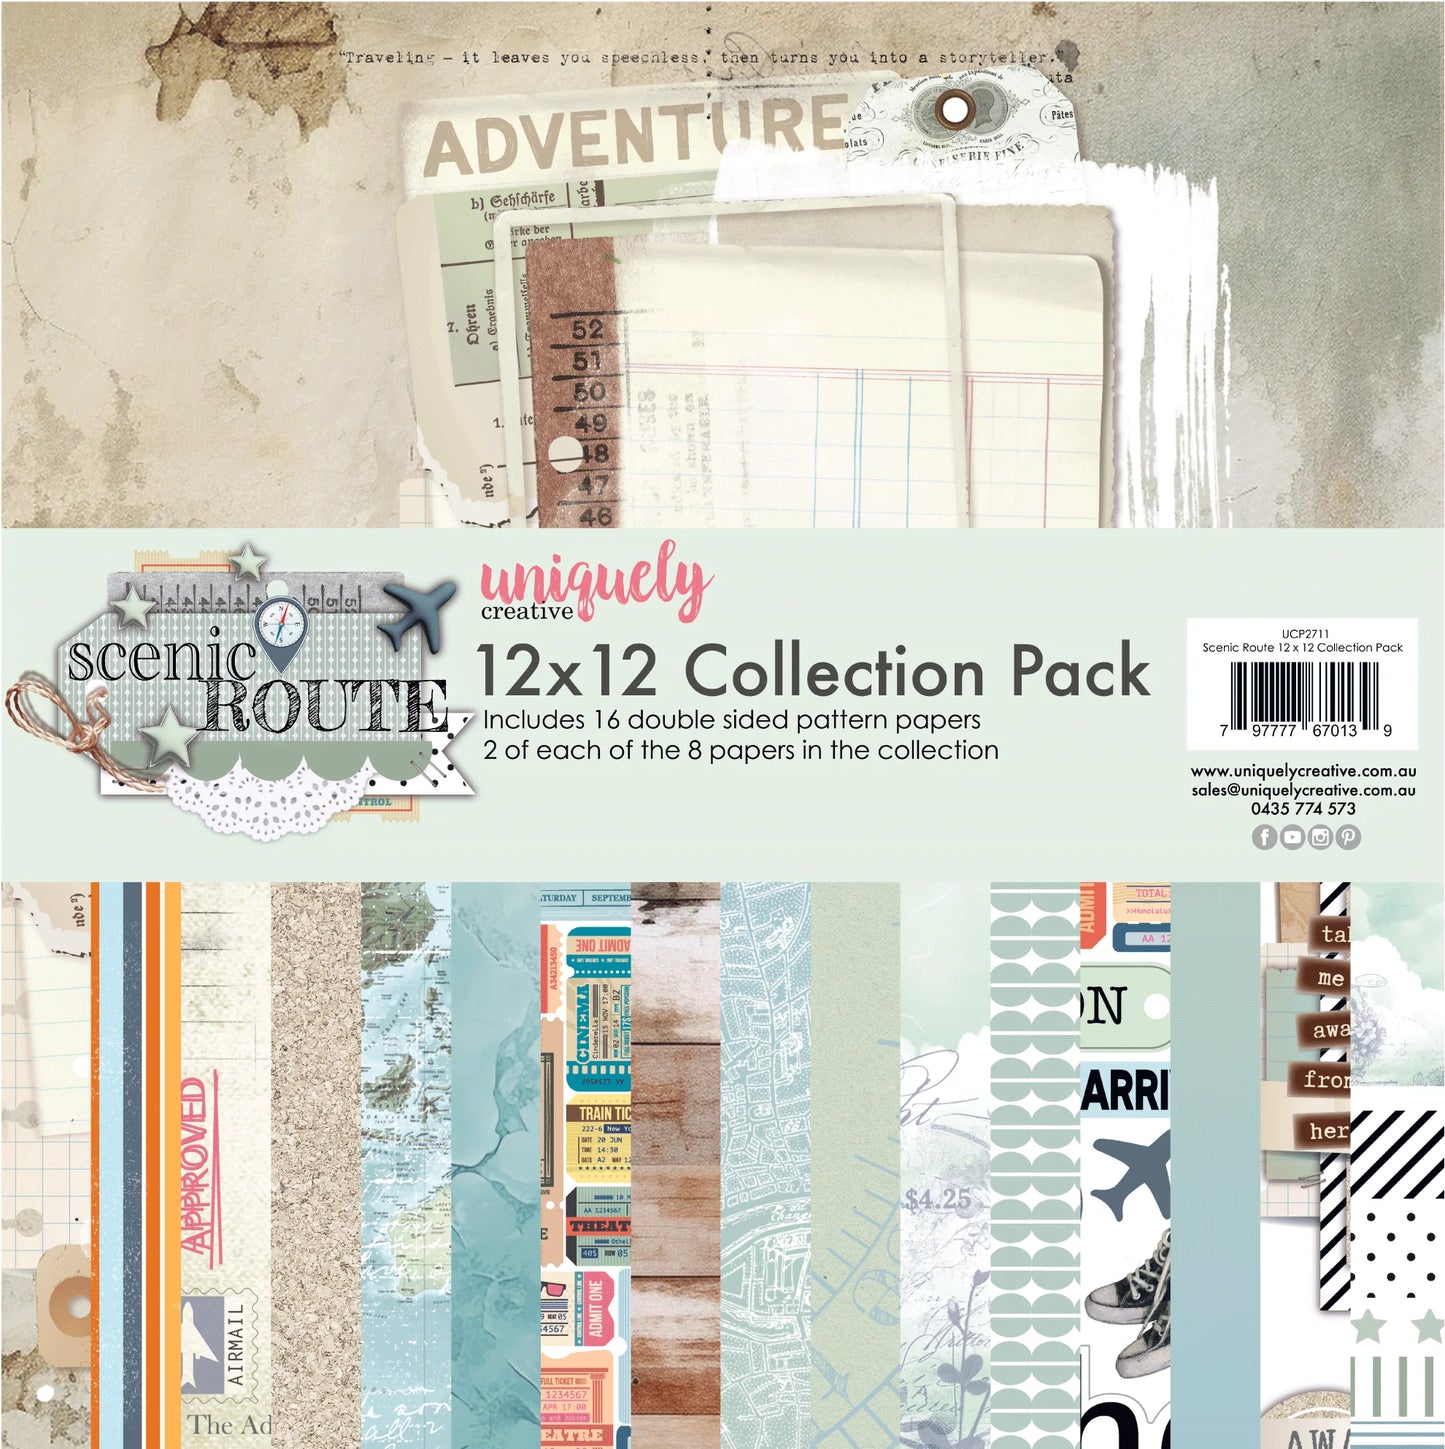 Uniquely Creative 12x12 Double Sided Paper Pack - Scenic Route